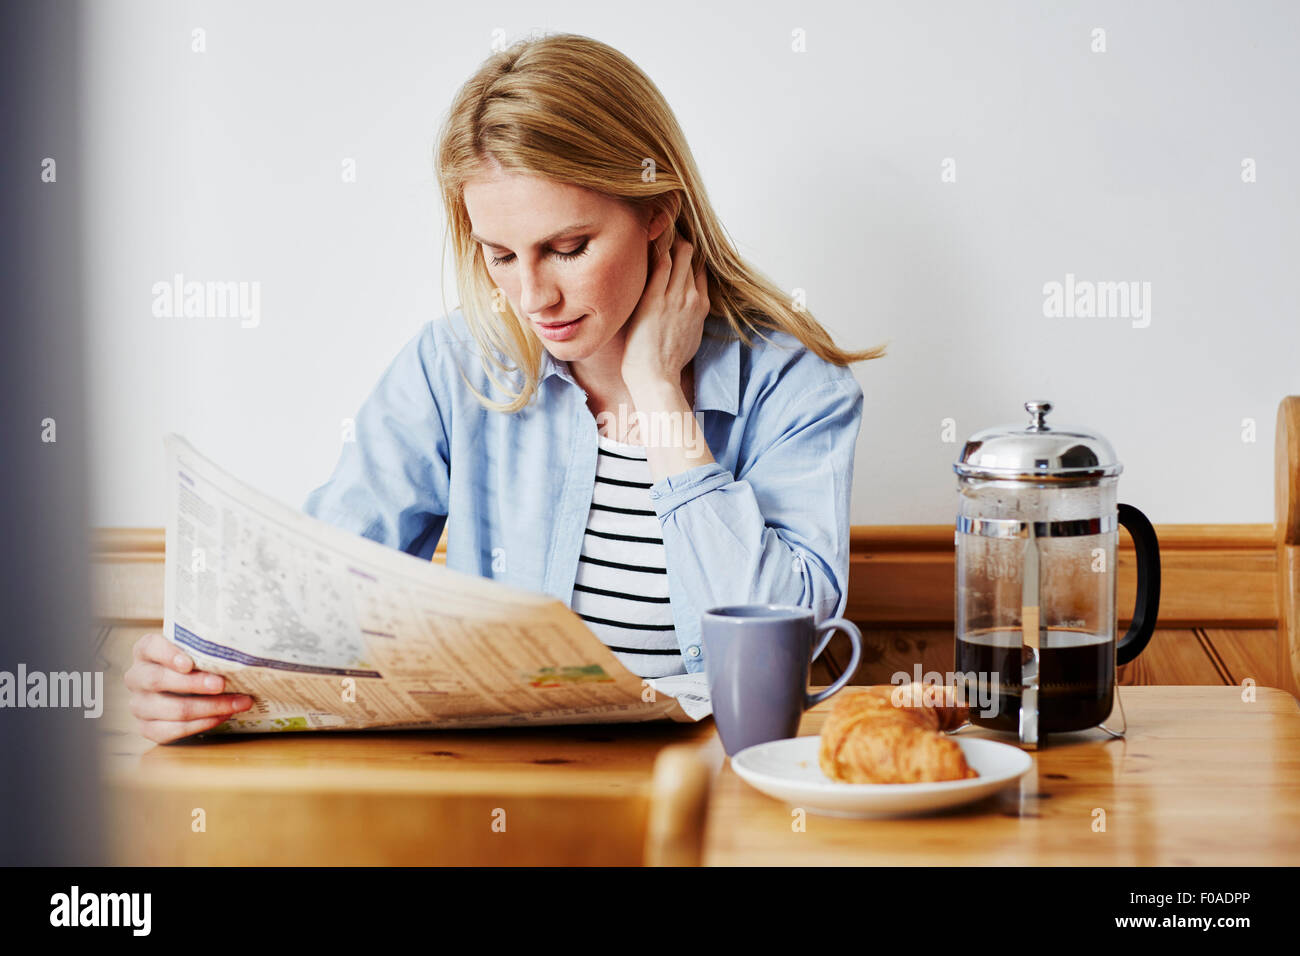 Mid adult woman reading newspaper Banque D'Images